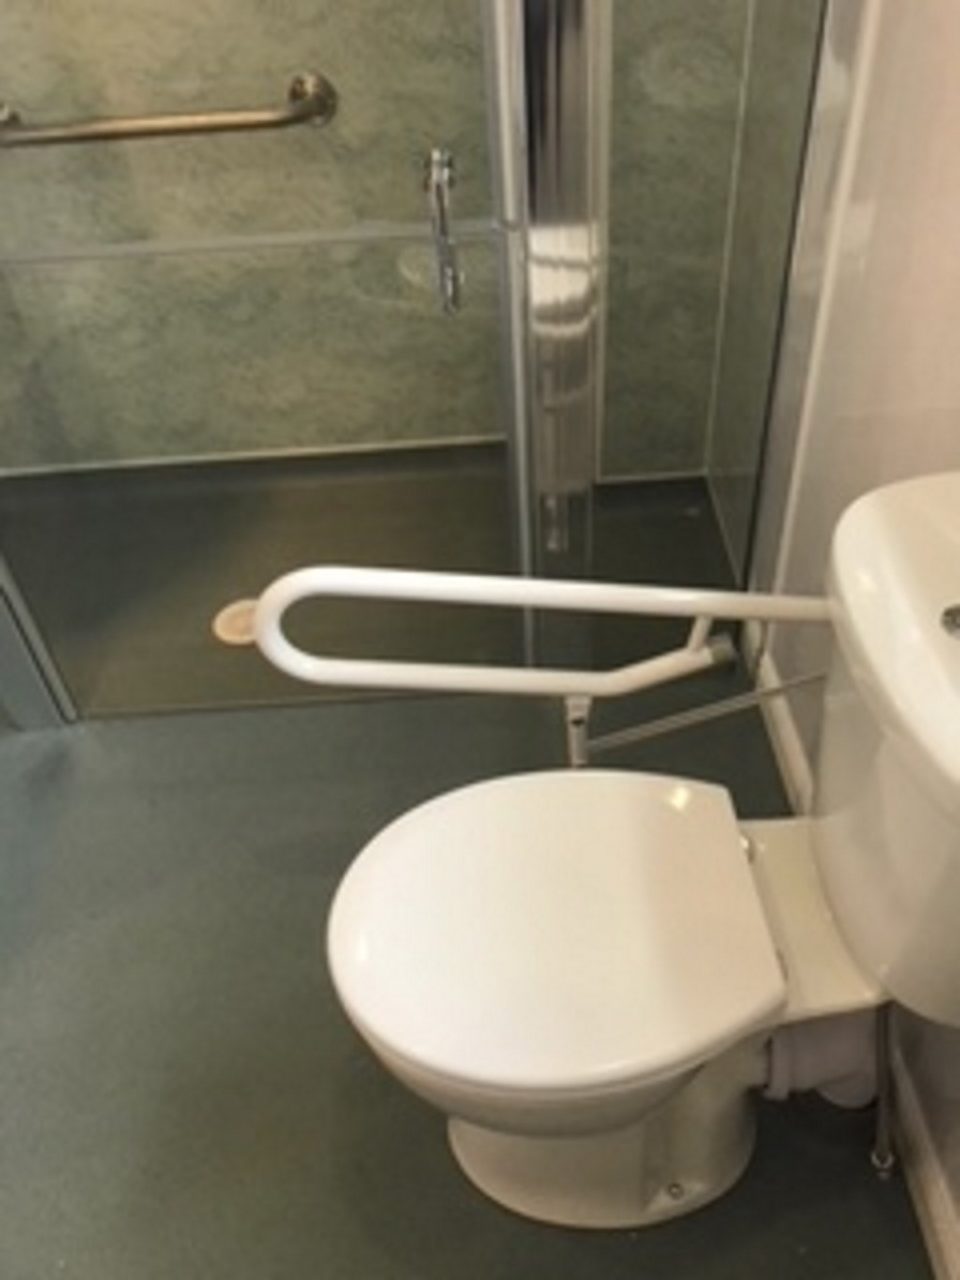 Wet Room Installer in Tamworth - functional glass screen to allow assistance - Example of Wetroom installed with disabled toilet grab rails